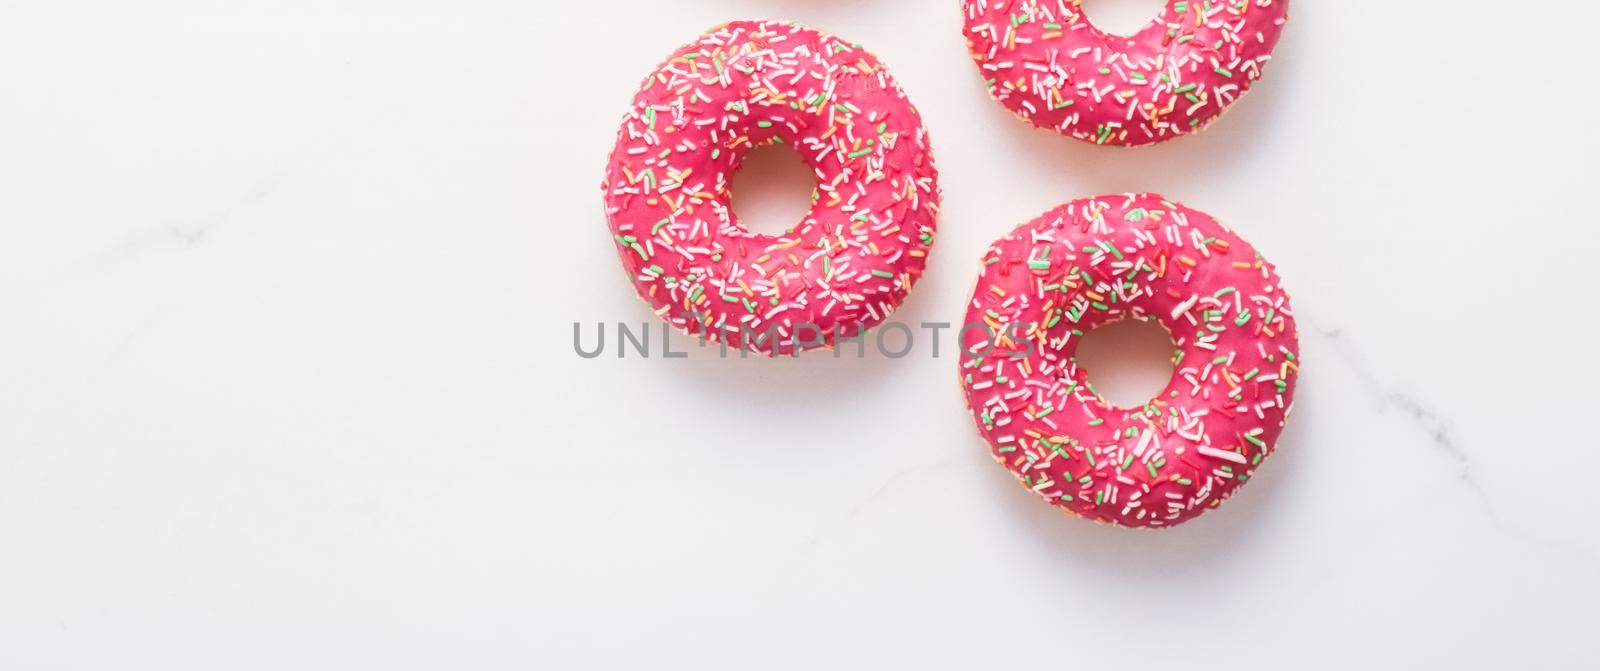 Bakery, branding and cafe concept - Frosted sprinkled donuts, sweet pastry dessert on marble table background, doughnuts as tasty snack, top view food brand flat lay for blog, menu or cookbook design